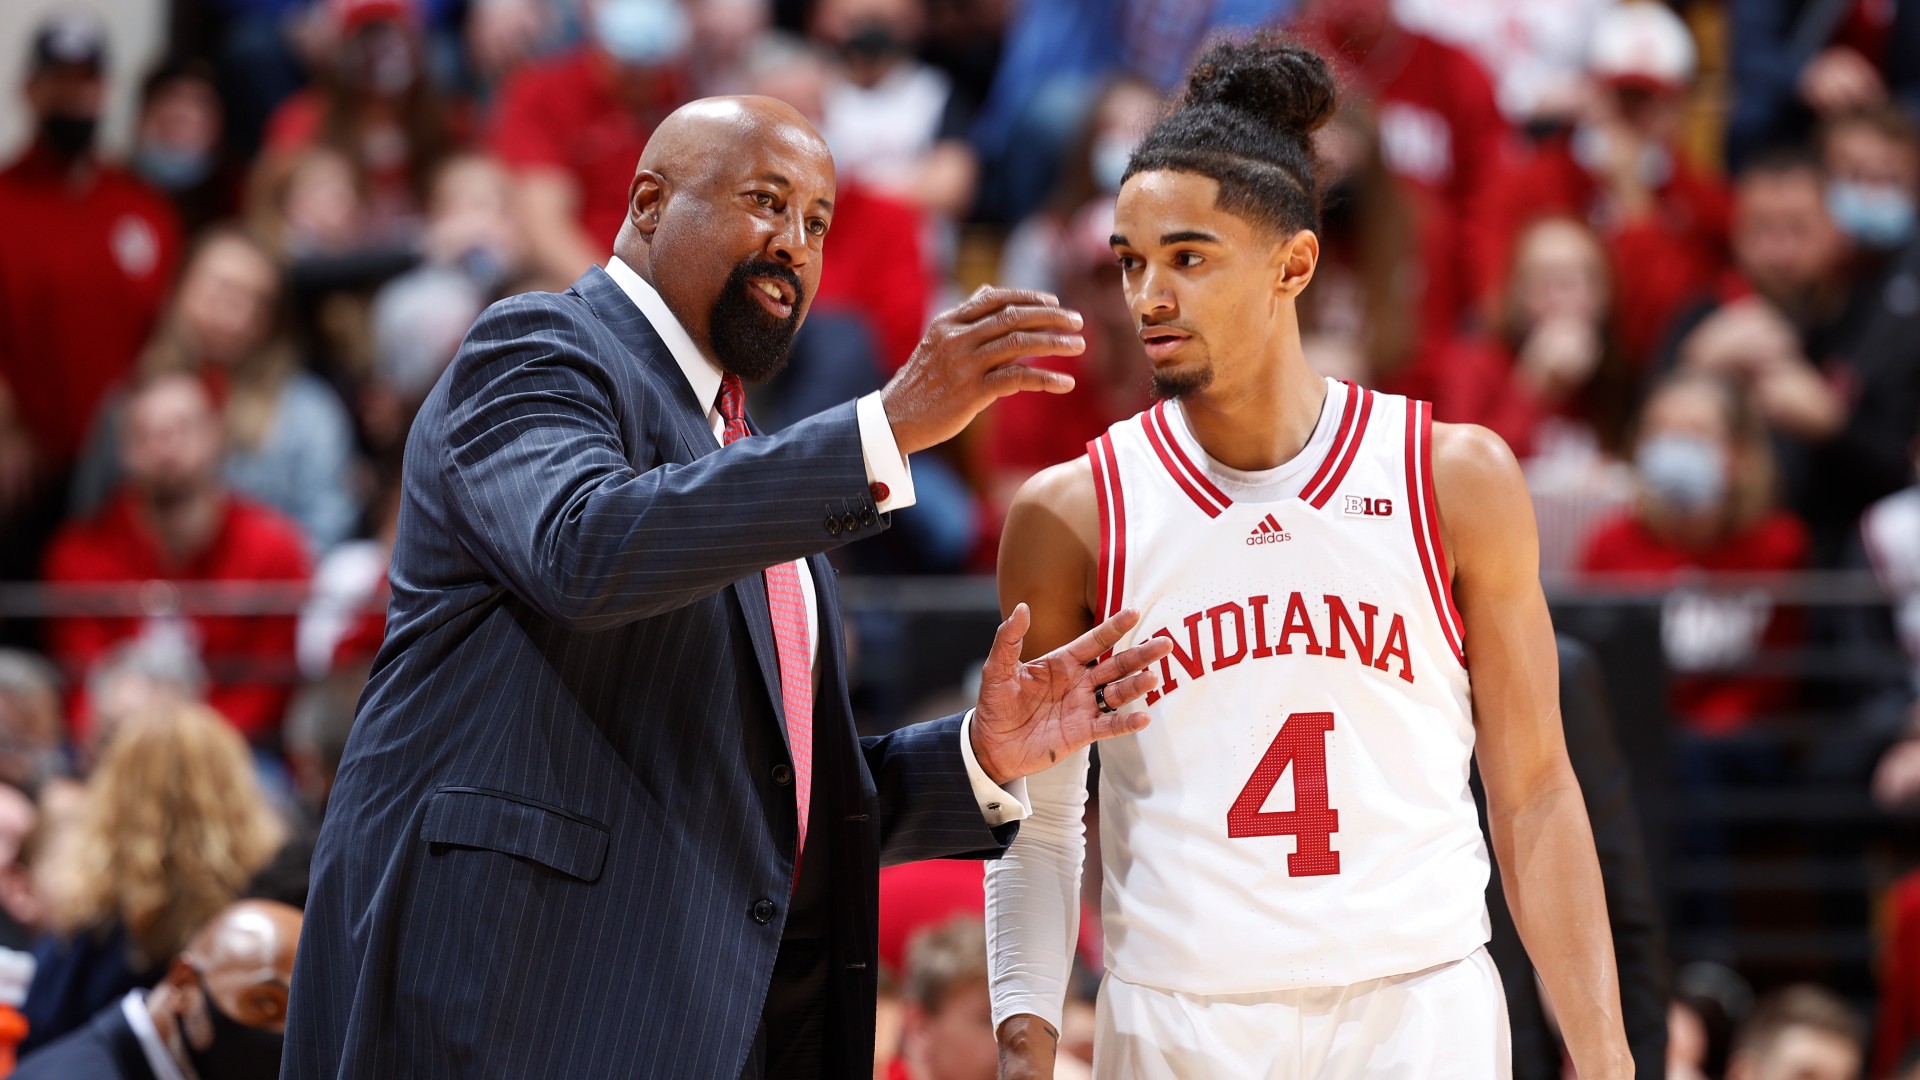 College Basketball Best Bets: Our Staff’s 3 Top Selections for Thursday, Including Ohio State vs. Indiana article feature image